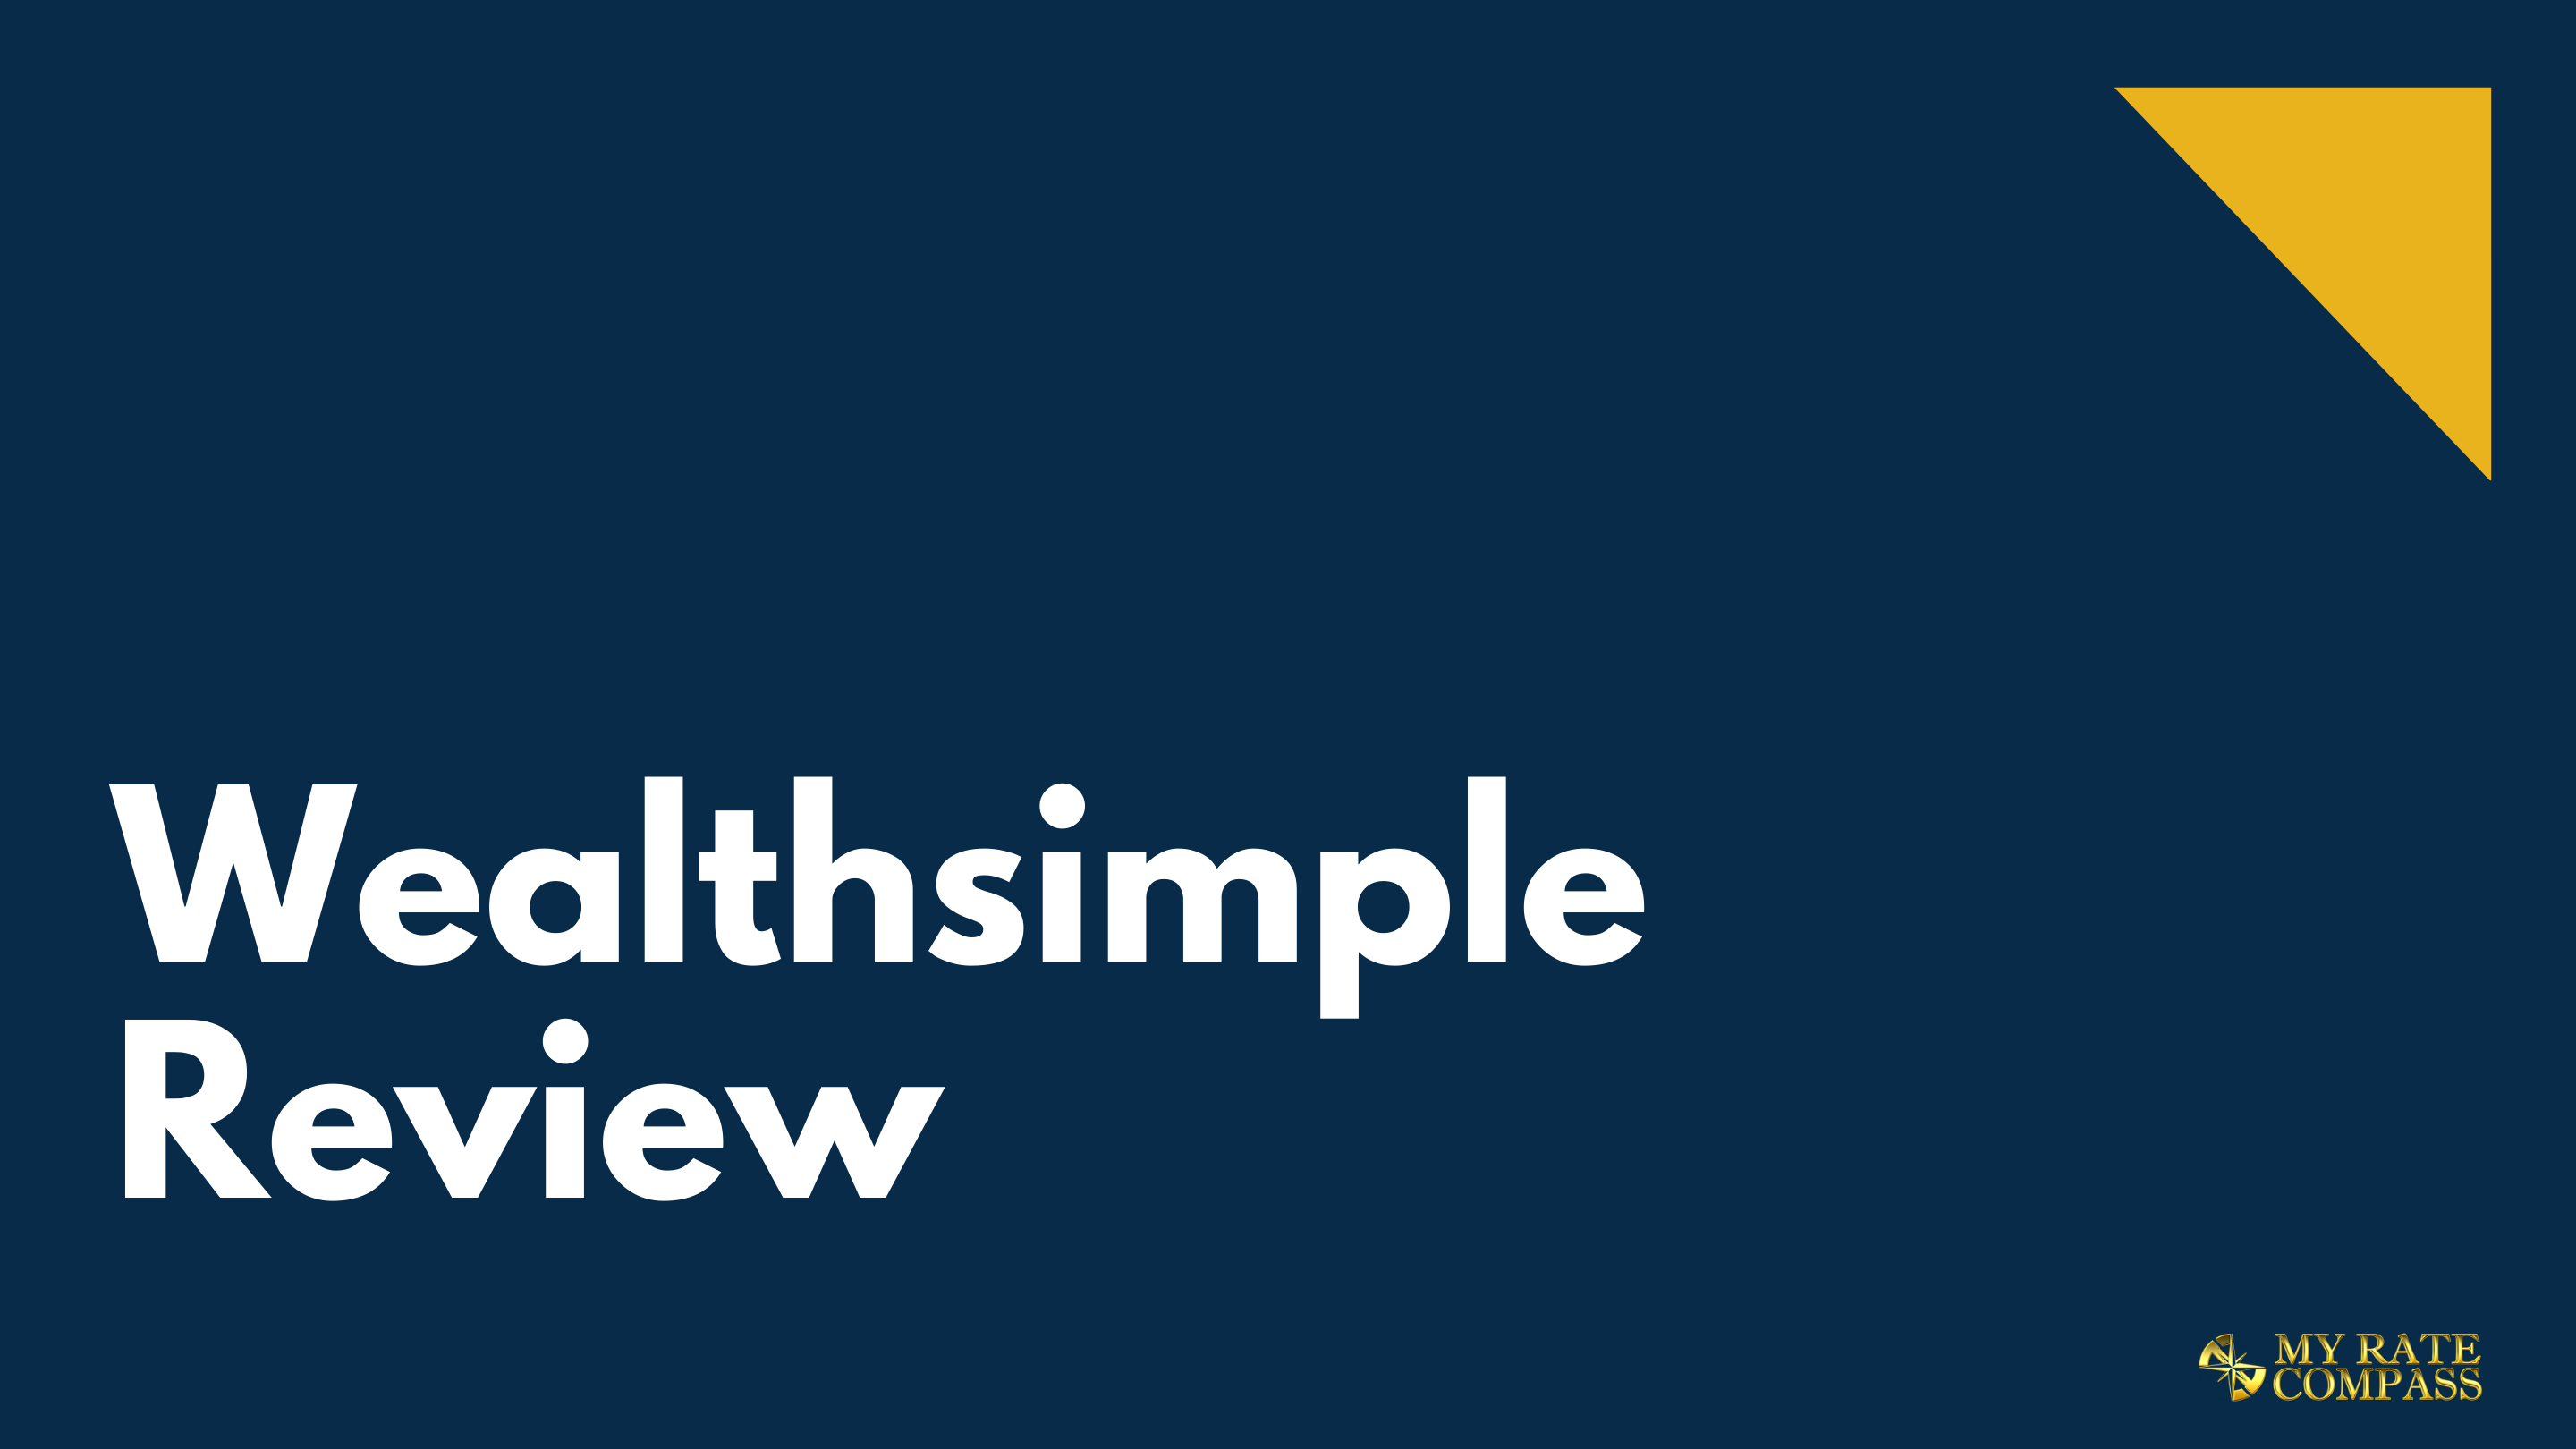 Wealthsimple review 2021- My Rate Compass